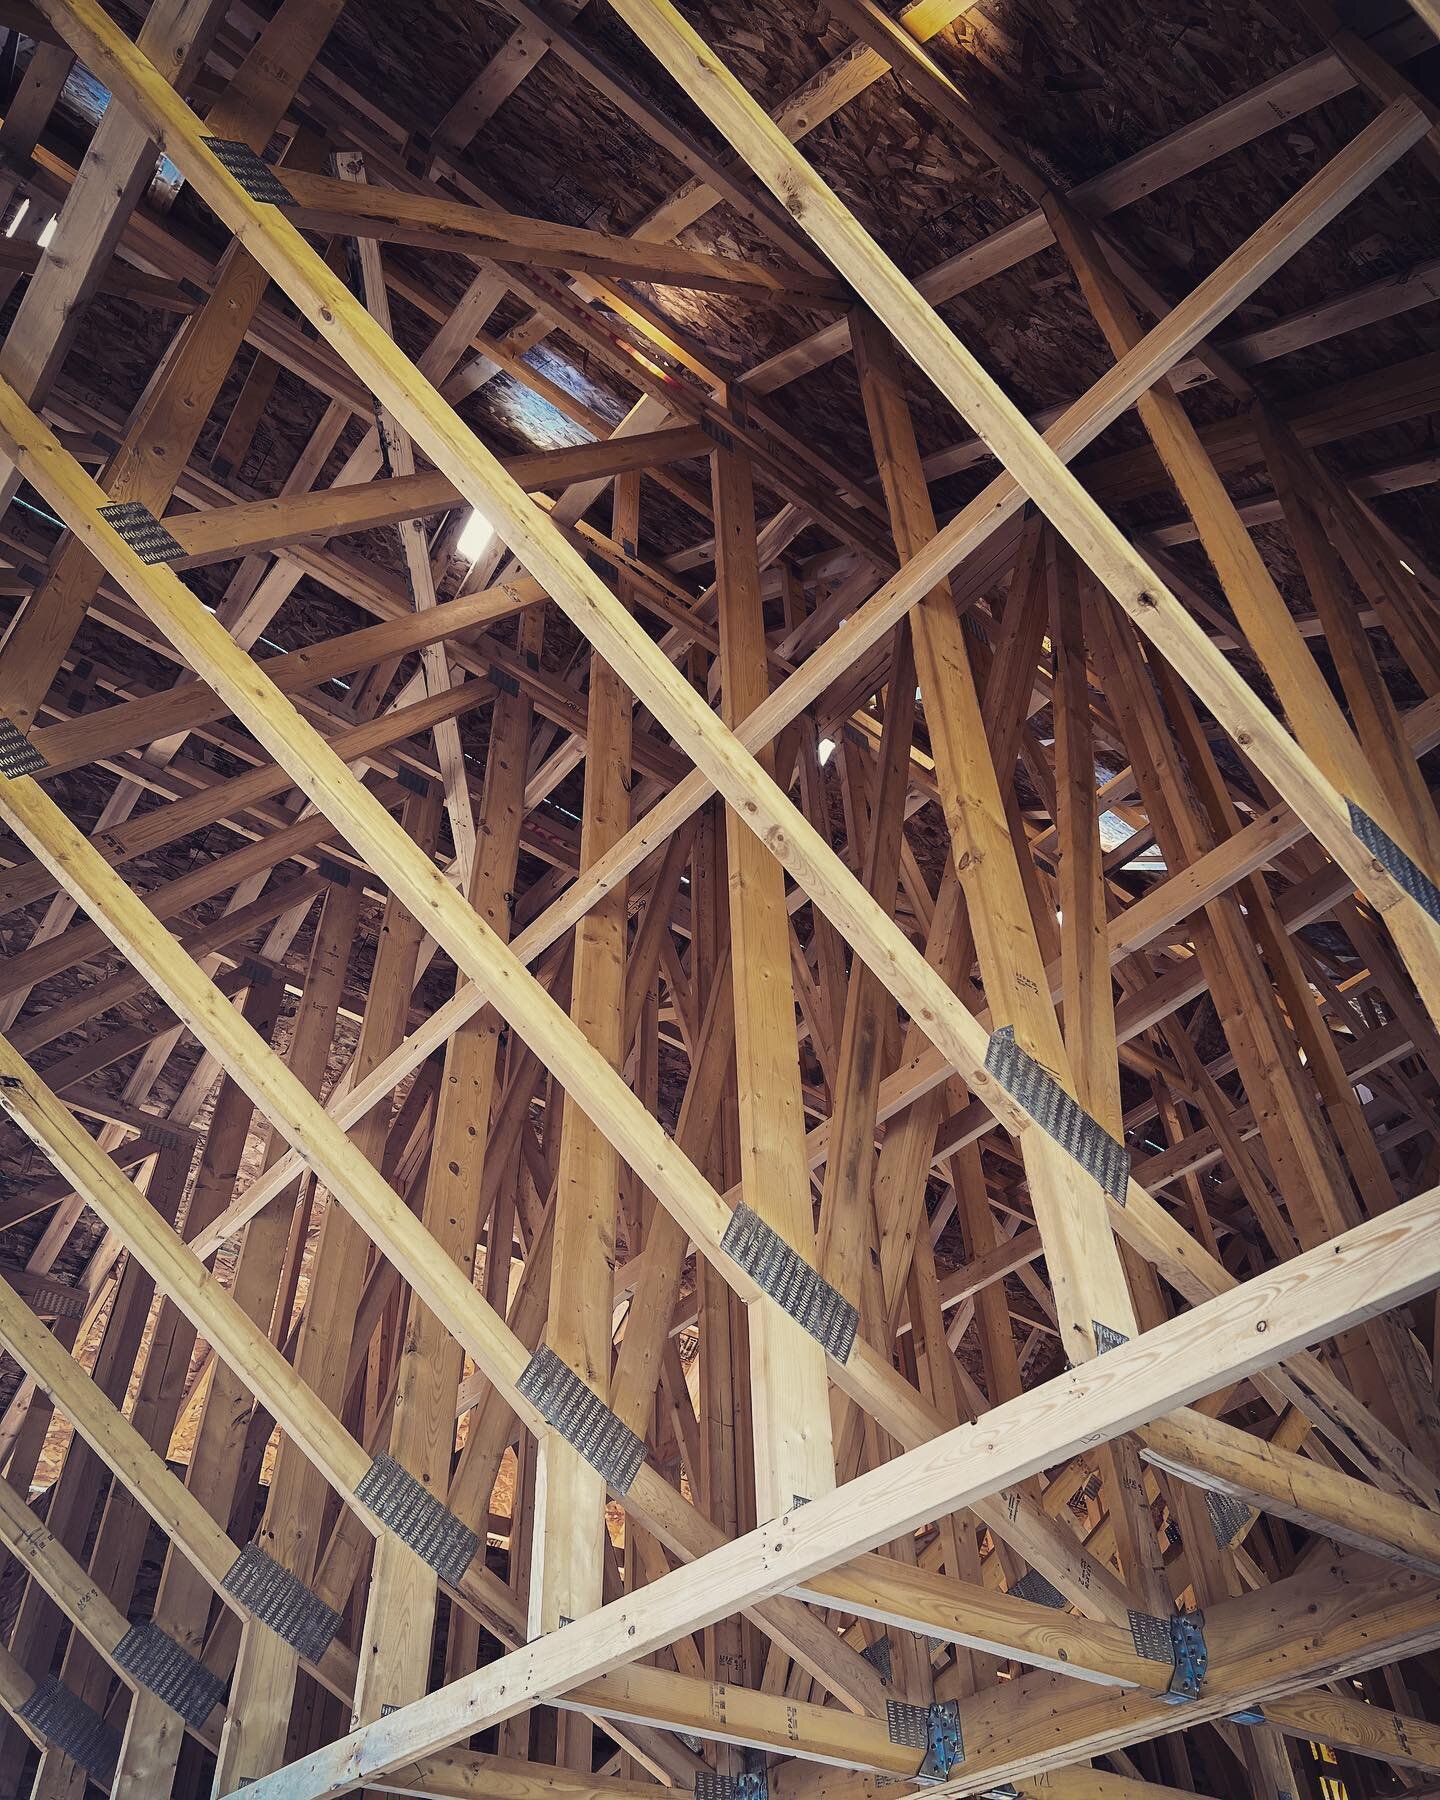 The intricacy of a new home.  Framing that forms the dream thats been in the making&hellip;

#awesomeframers #customdesign #custombuilder #home #framer #homedesigns #yqlsmallbusiness